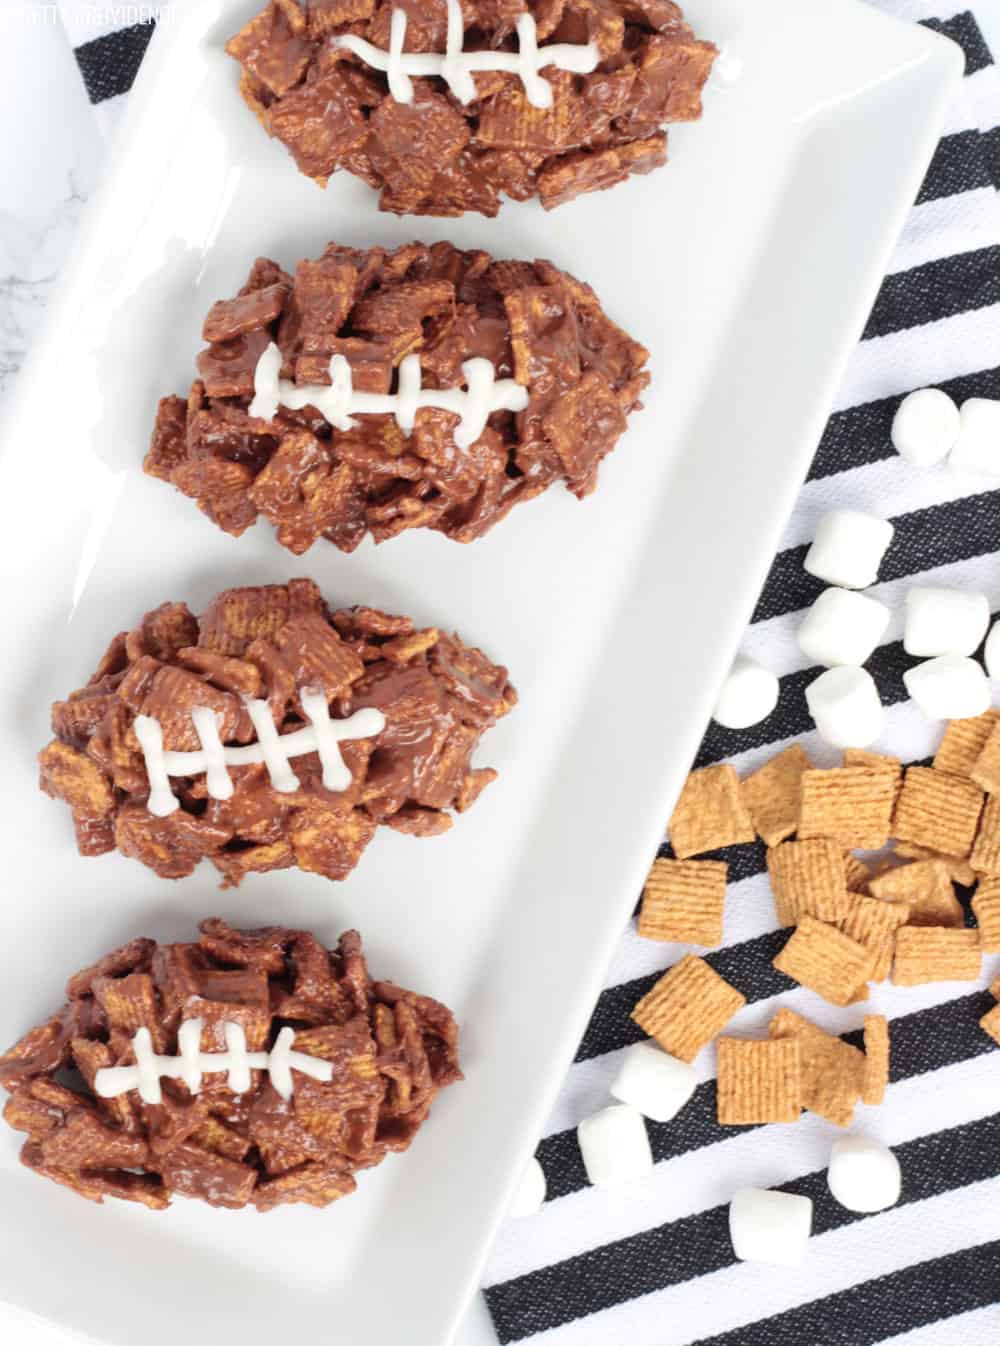 Three football-shaped desserts on a white plate, s'mores bars made with golden grahams cereal, chocolate and icing.